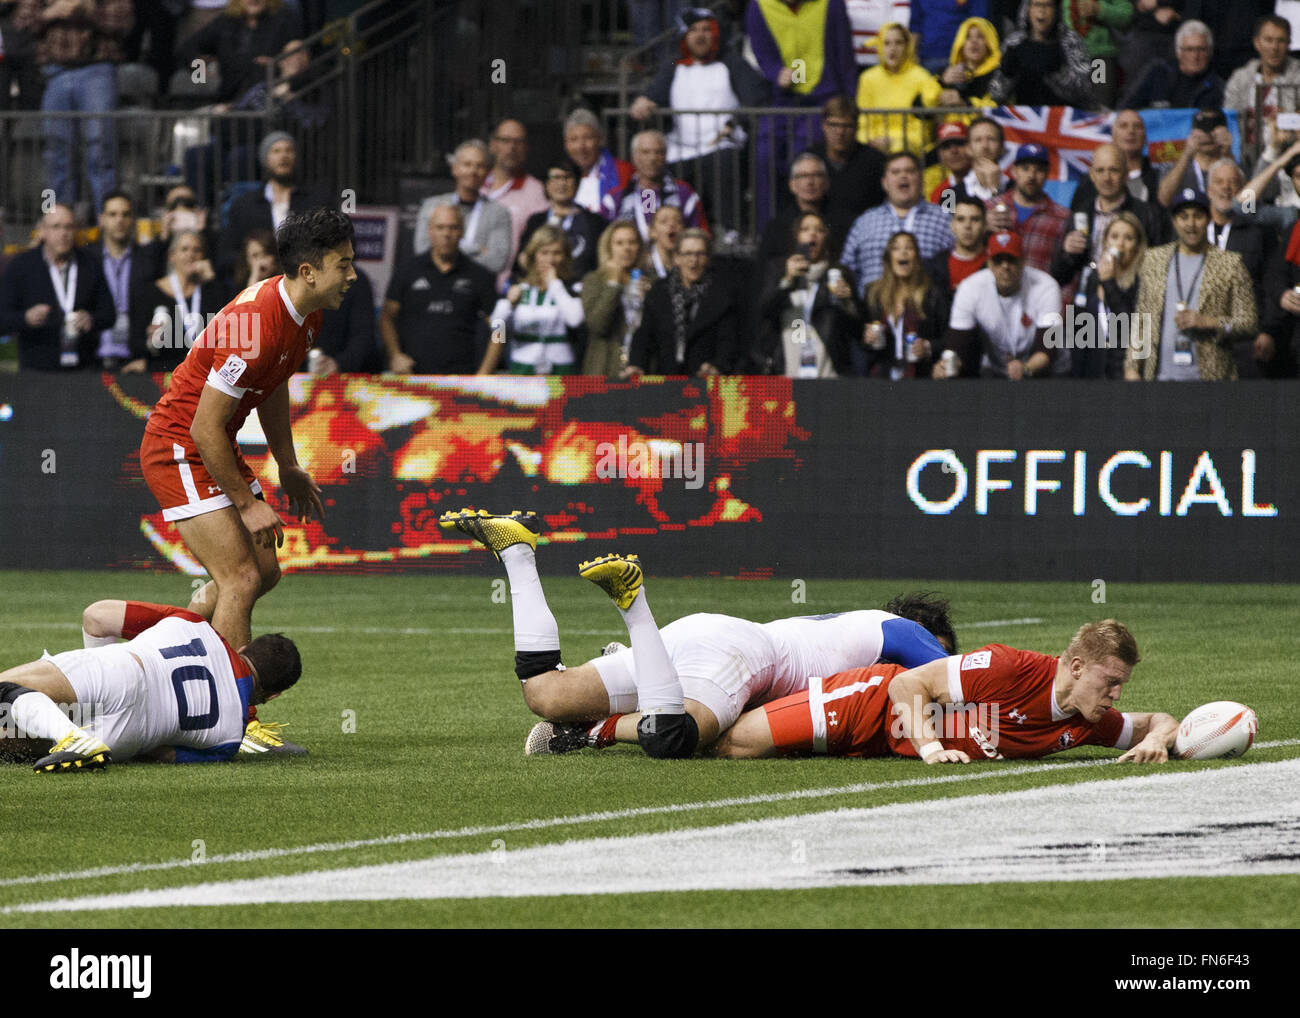 Vancouver, BC, Canada. 13th Mar, 2016. France (White) vs Canada (Red) during the Bowl Final of the HSBC World Rugby Sevens Series at BC Place Stadium in Vancouver, BC, Canada. Canada won 19-17. Credit:  Andrew Chin/ZUMA Wire/ZUMAPRESS.com/Alamy Live News Stock Photo